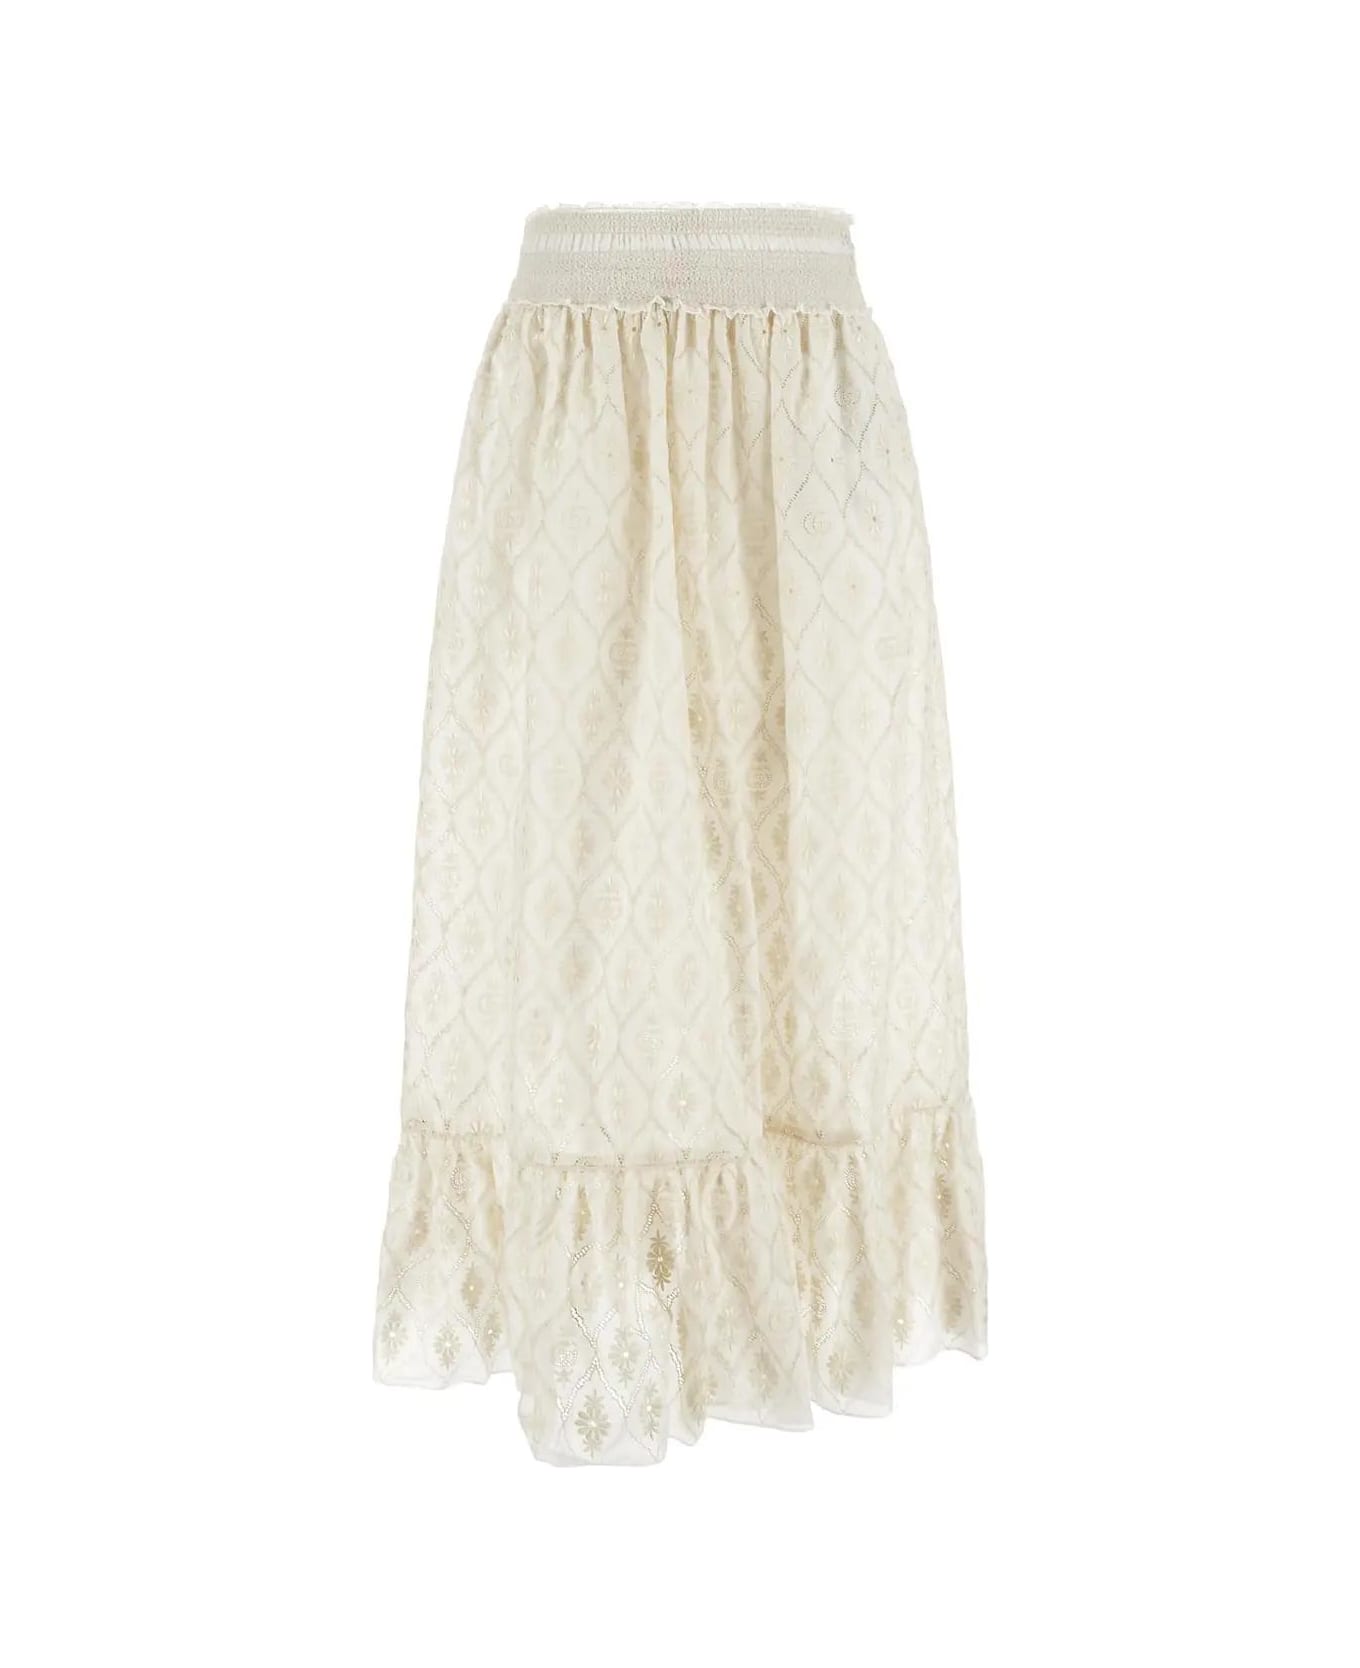 Gucci Double G Flower Lace Skirt - White